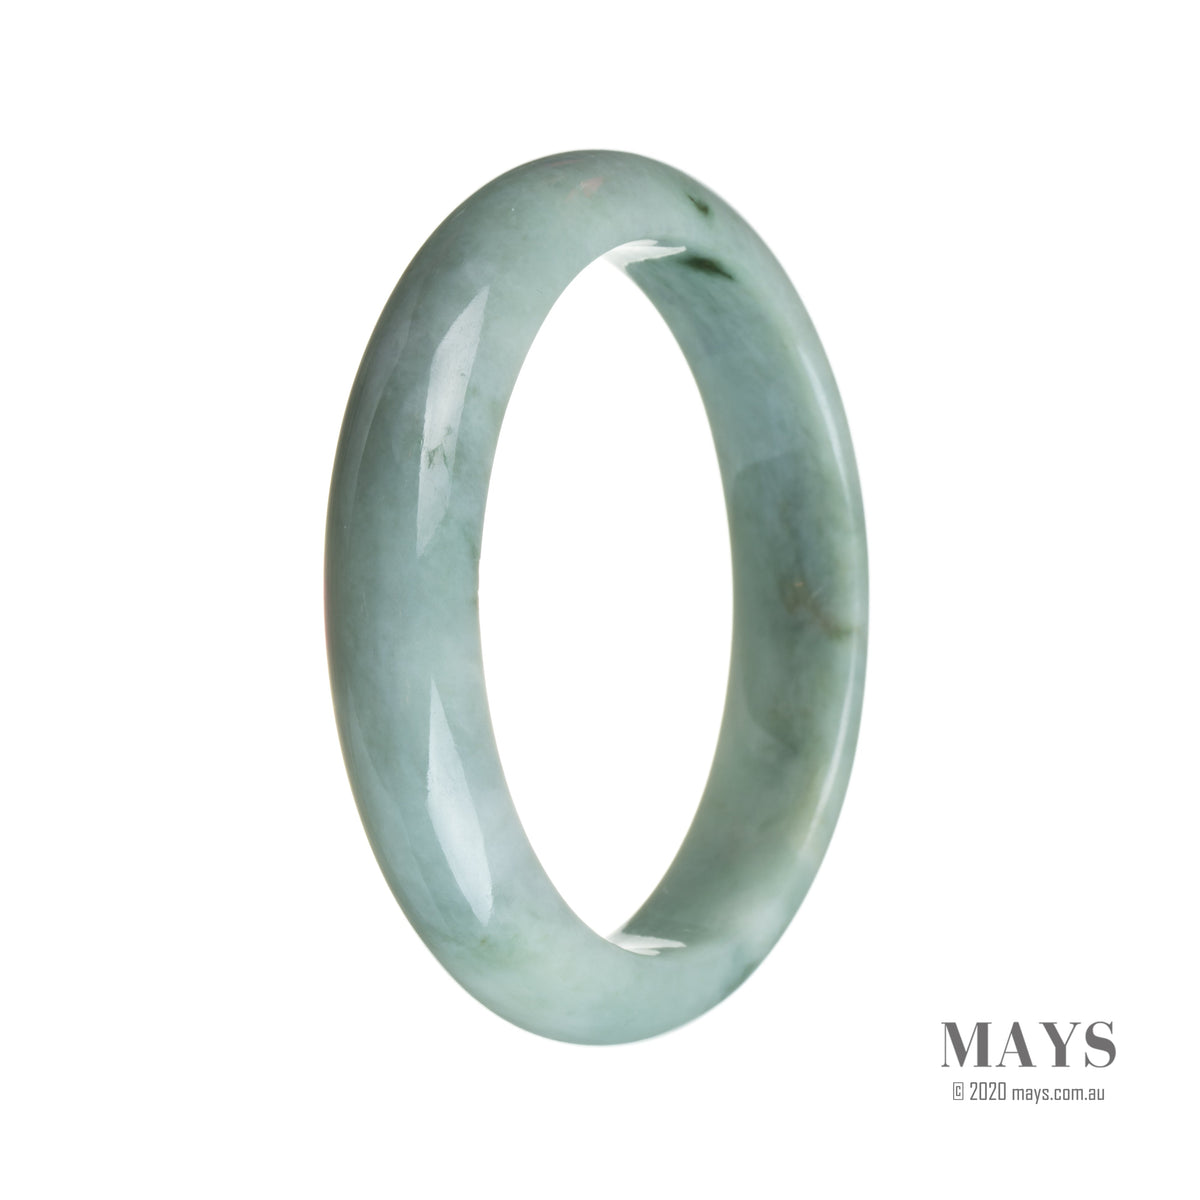 A pale green Burmese jade bangle bracelet with a semi-round shape, measuring 59mm in size.